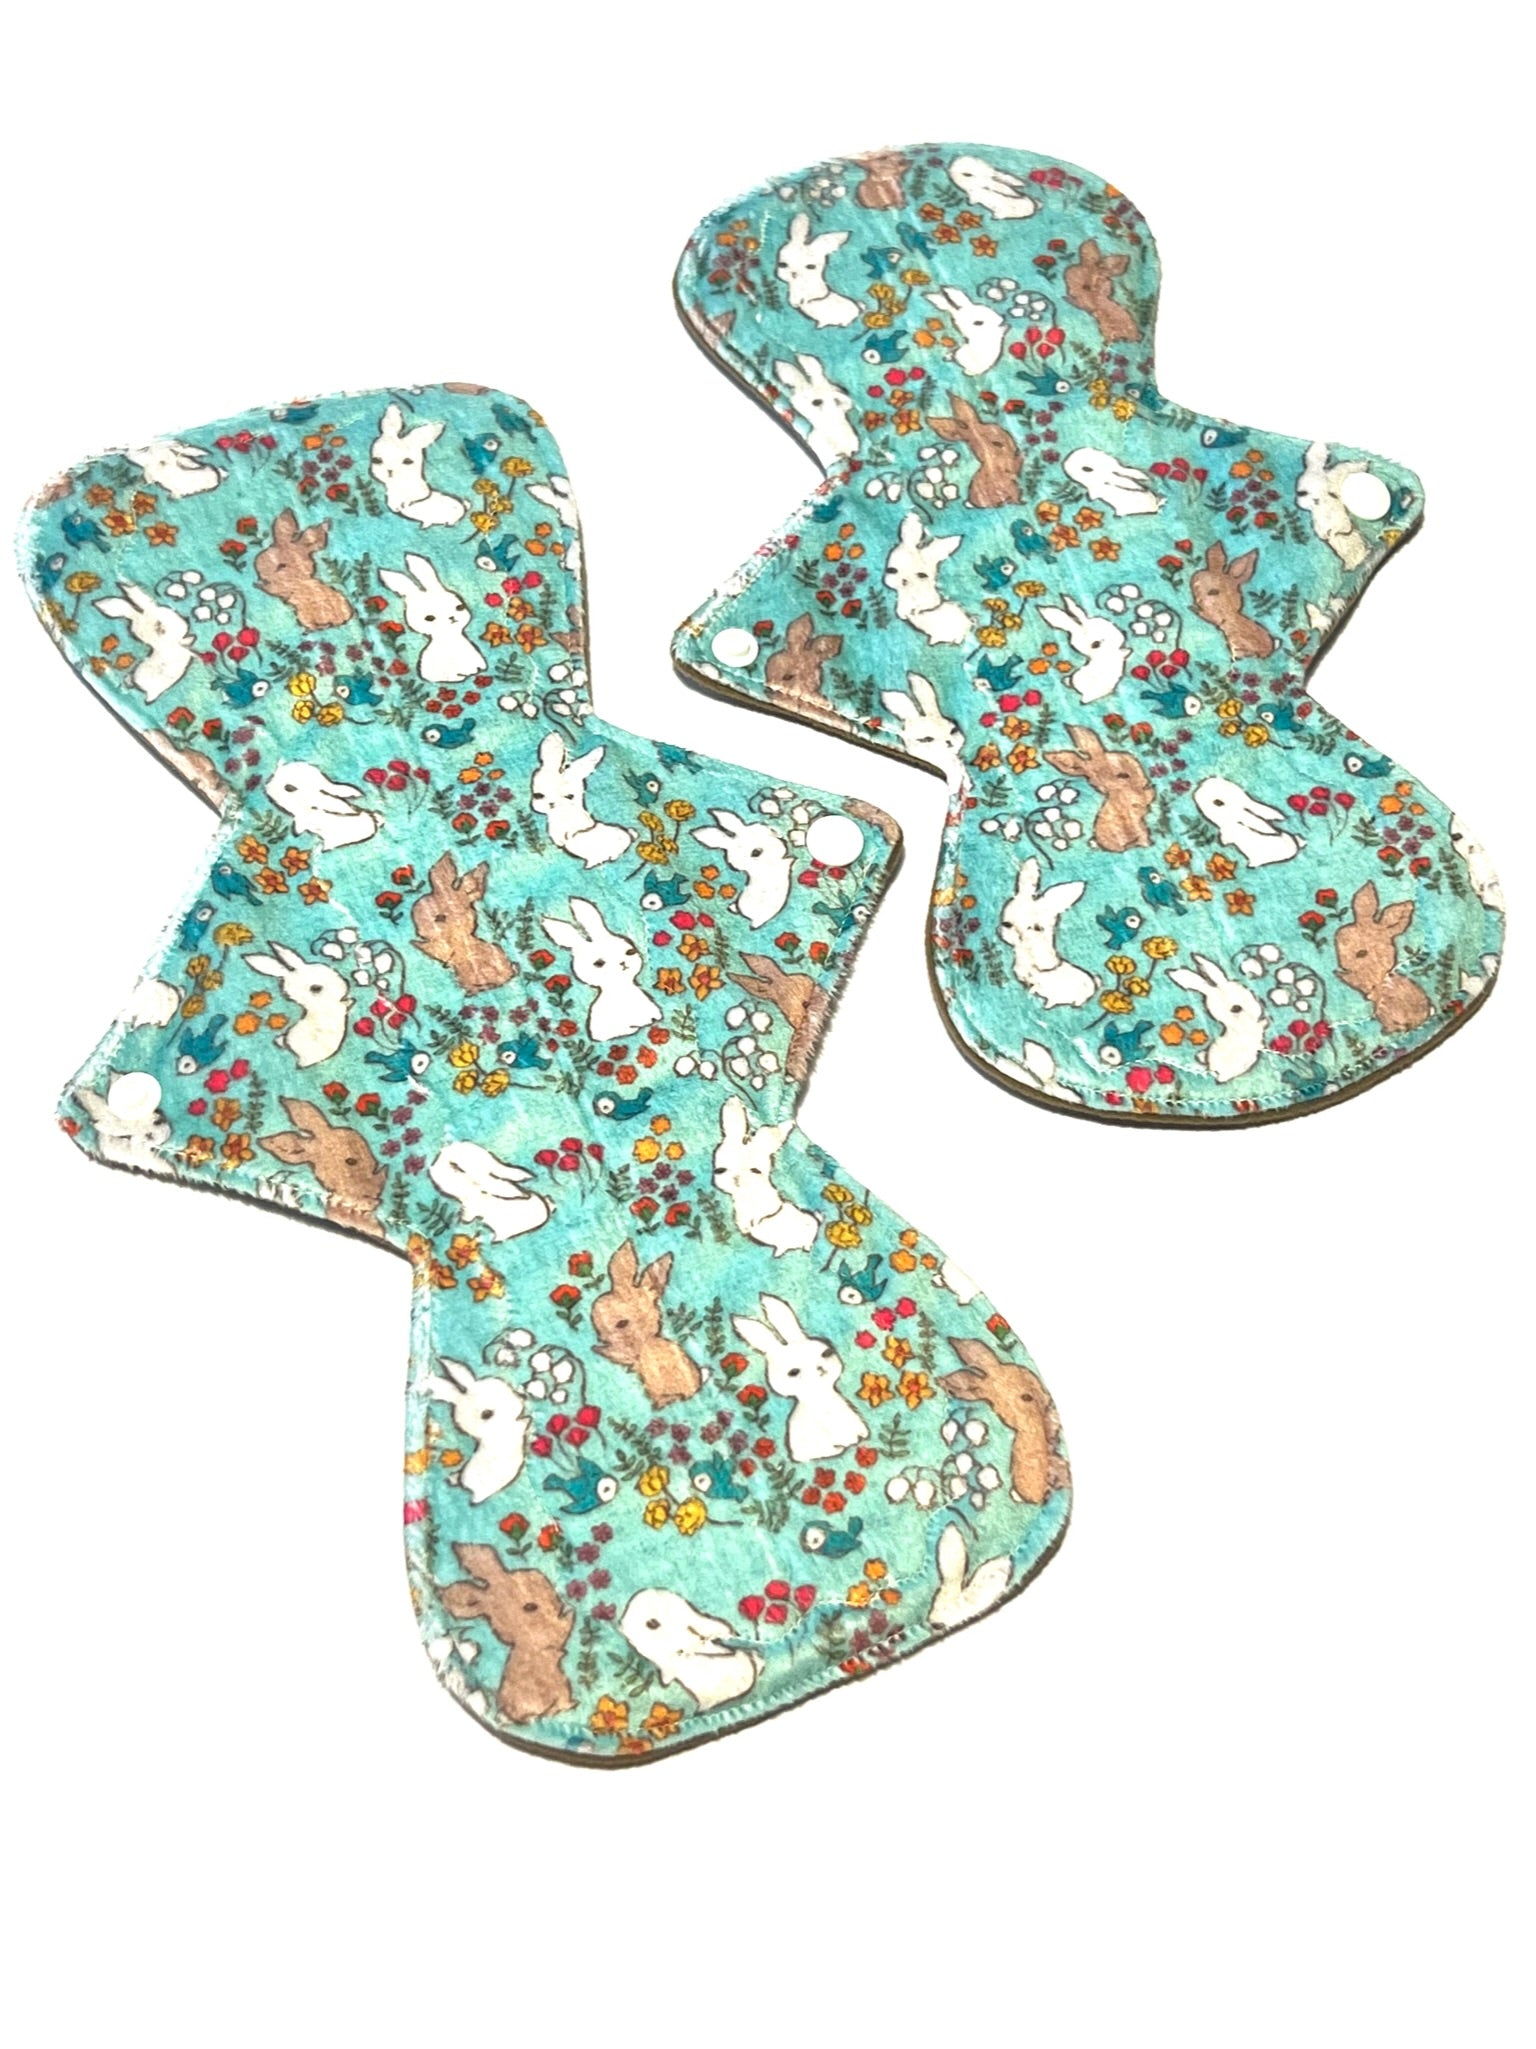 Fluffy Frolic Specialty MInky Reusable Cloth Pads